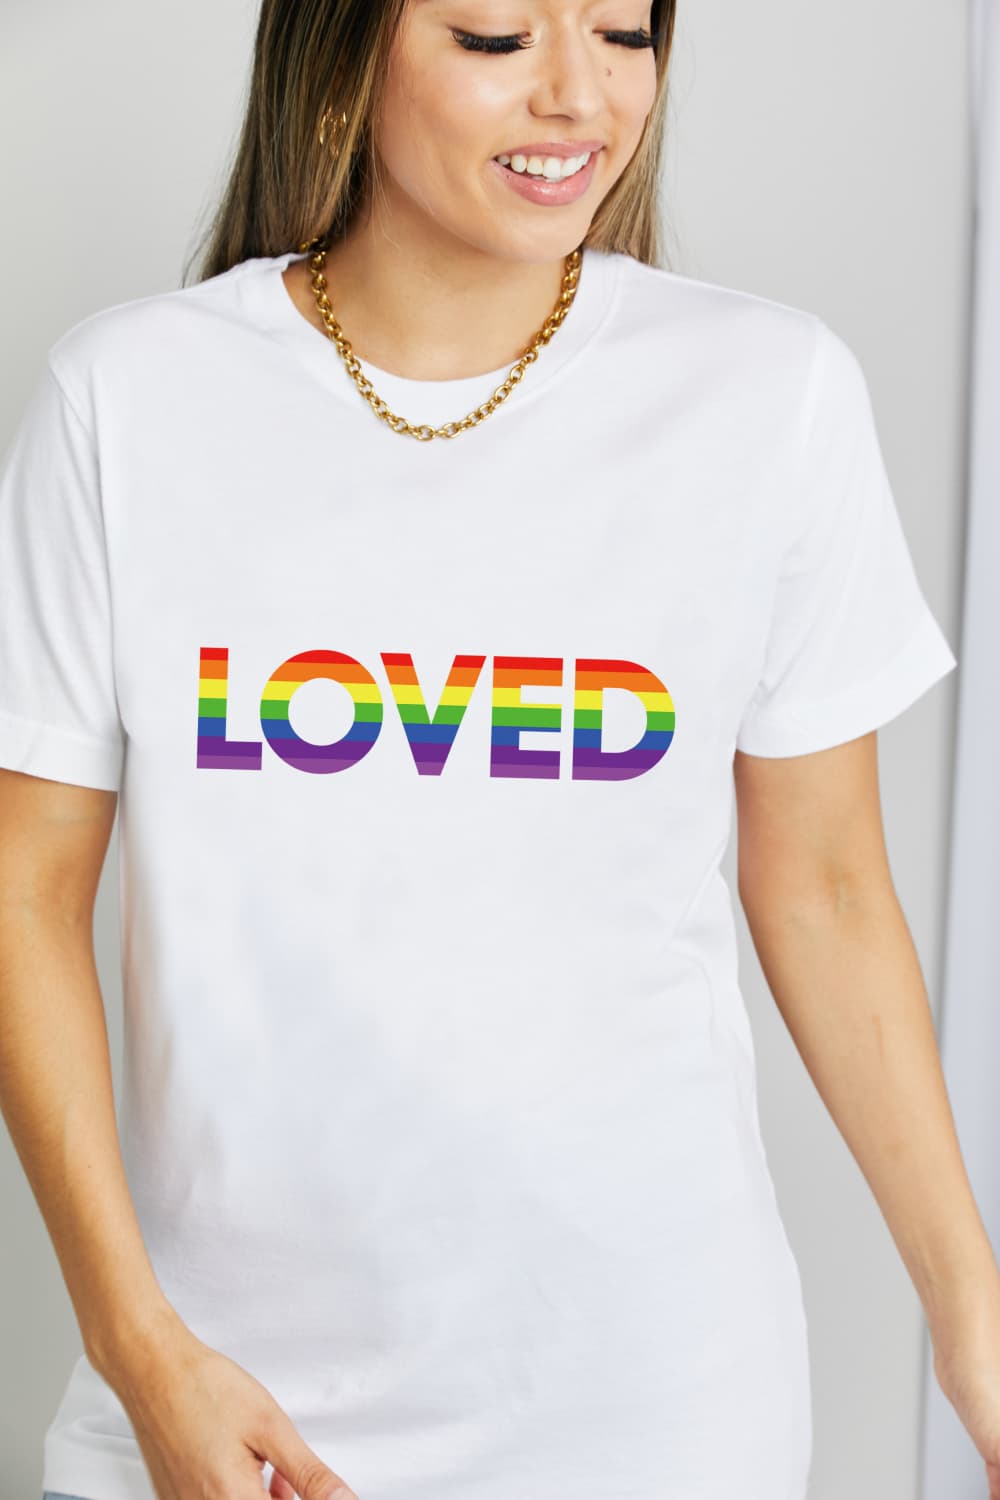 Simply Love “LOVED” Graphic 100% Cotton T-Shirt